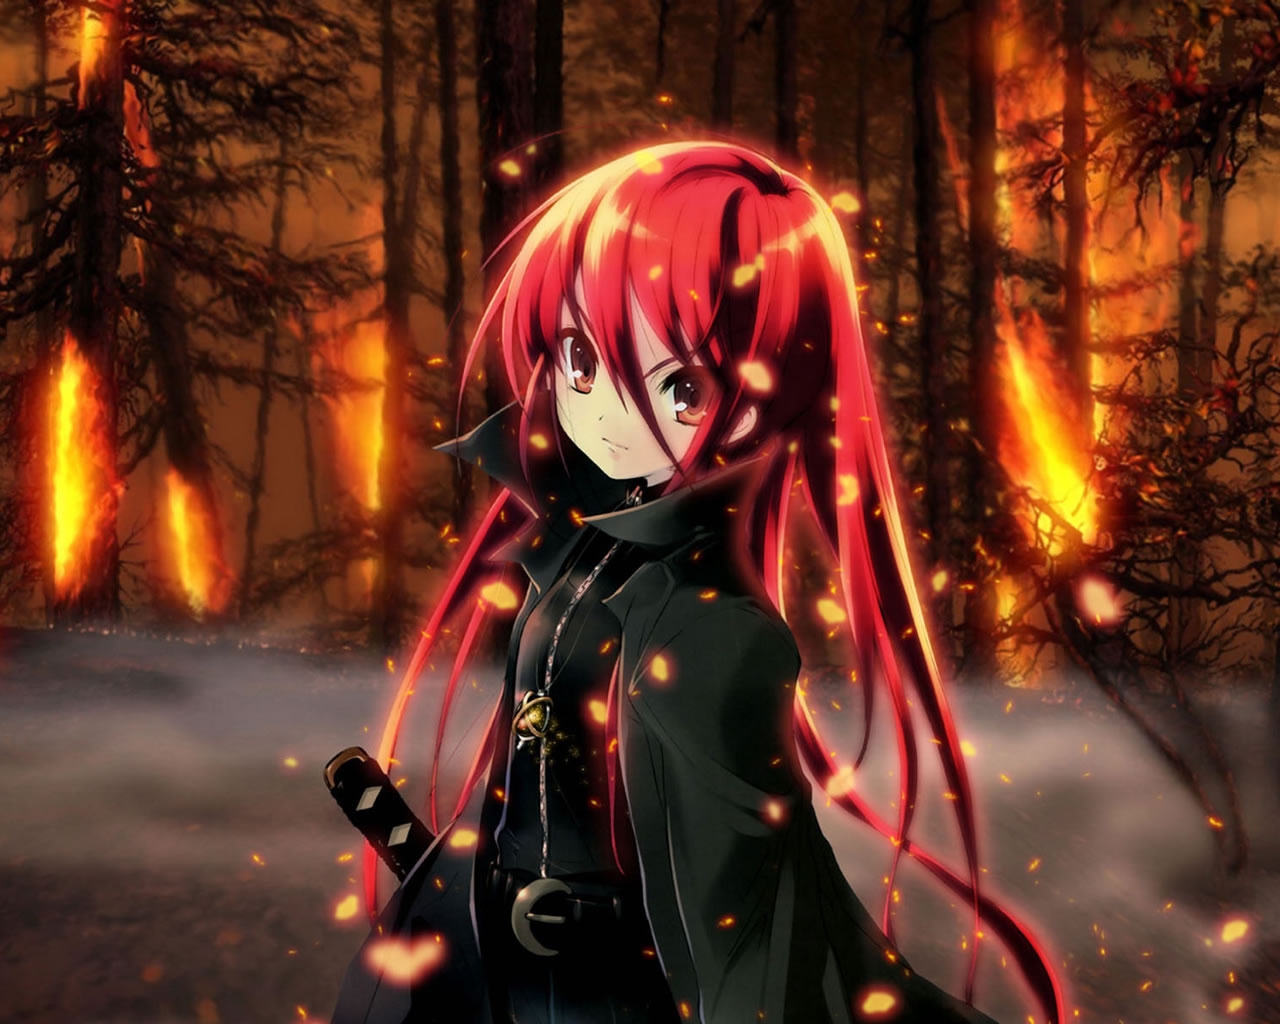 Beautiful Girl in Fire for 1280 x 1024 resolution